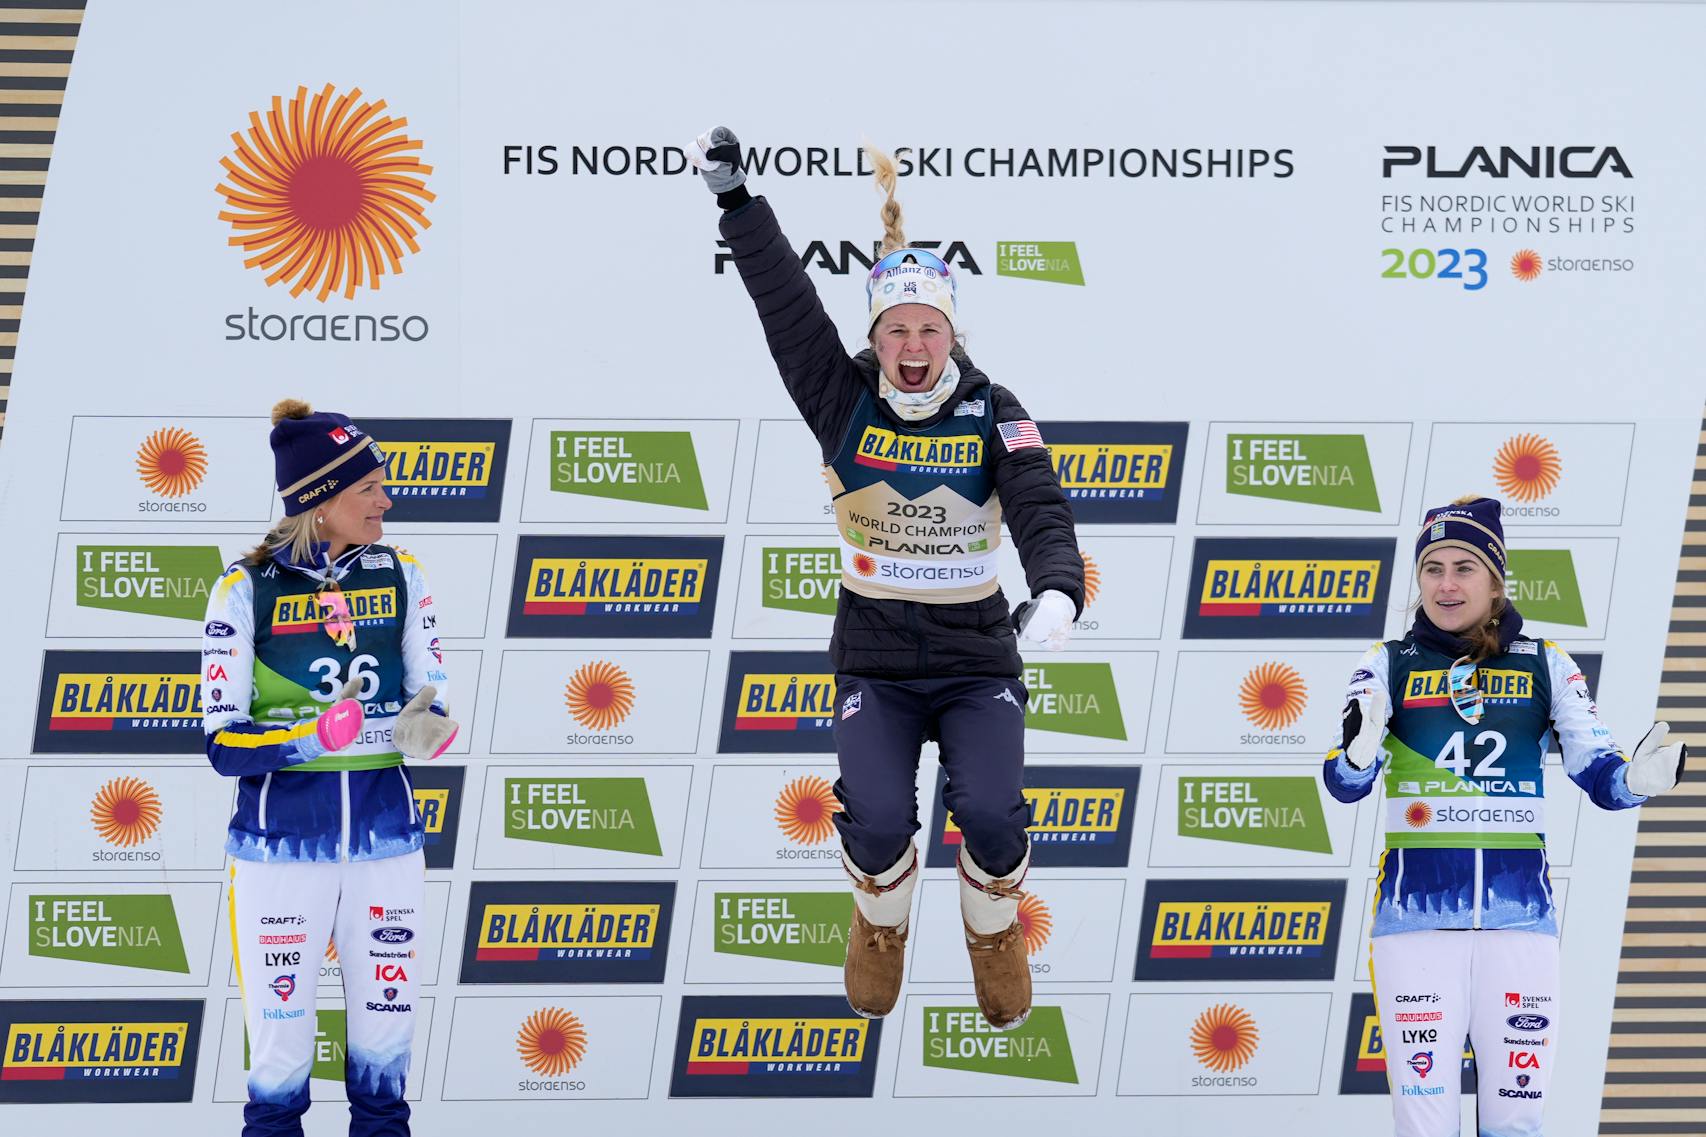 Jessie Diggins became the first American, male or female, to earn a world title in an individual cross-country race when she took gold in the 10km freestyle at the World Championships in Planica, Slovenia in February.